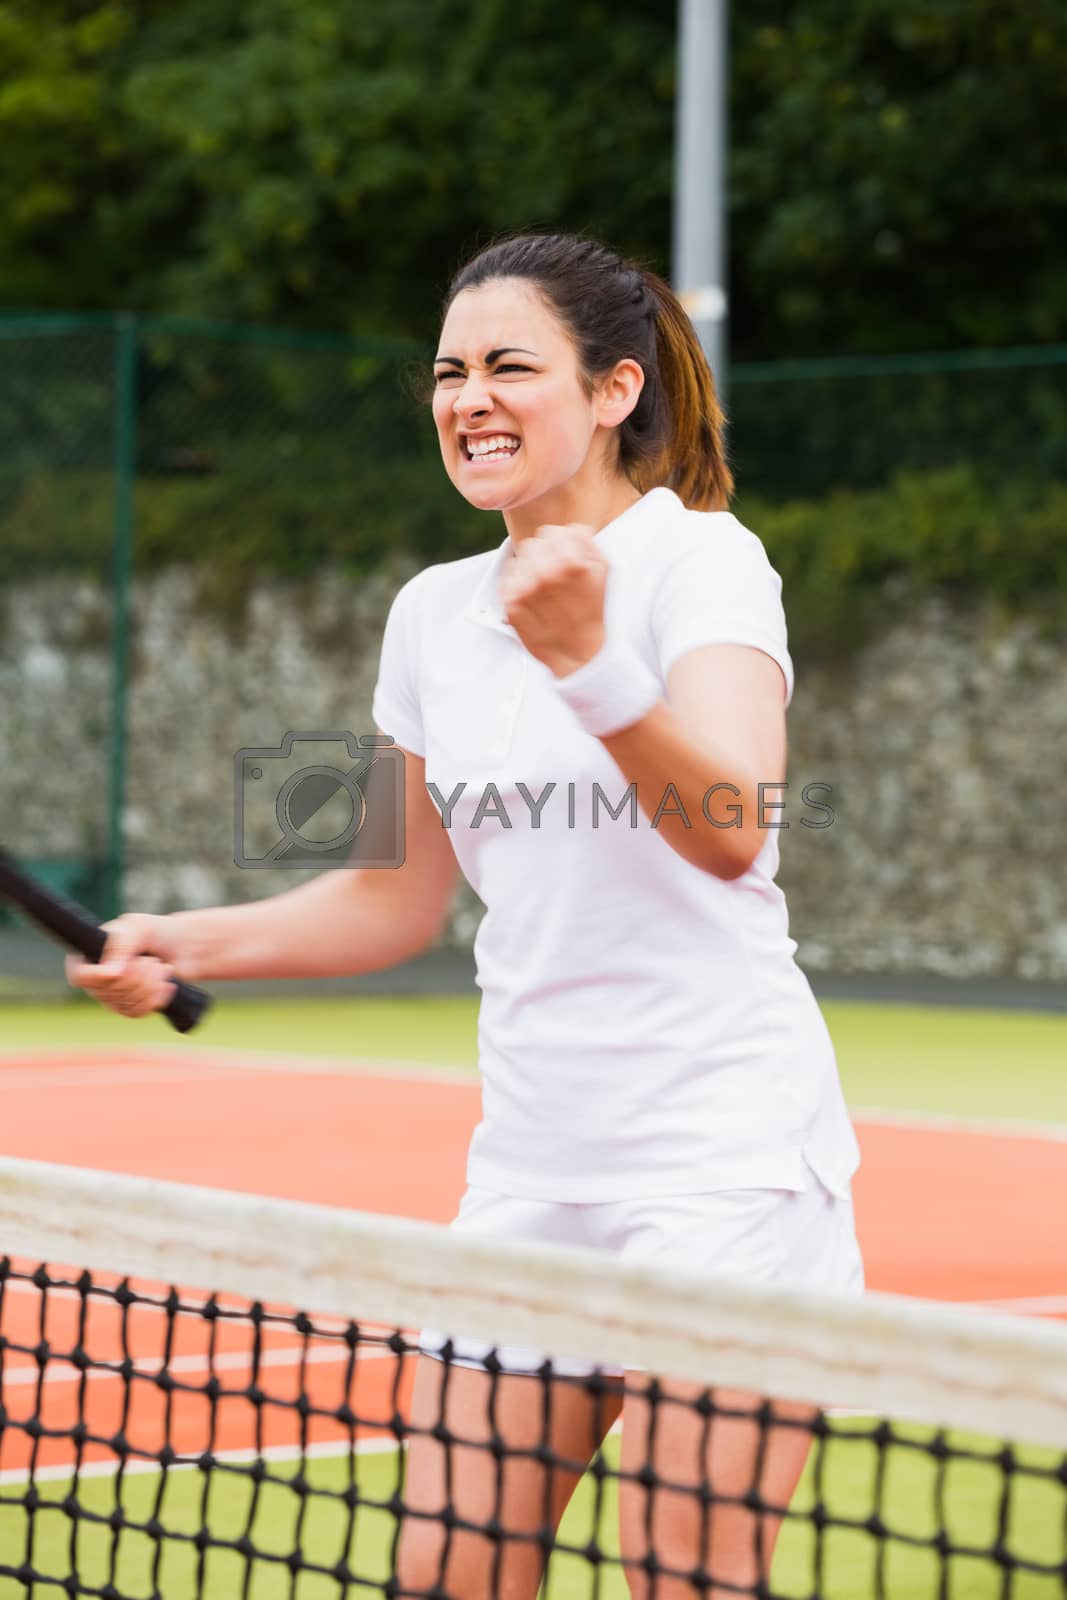 Royalty free image of Pretty tennis player celebrating a win by Wavebreakmedia